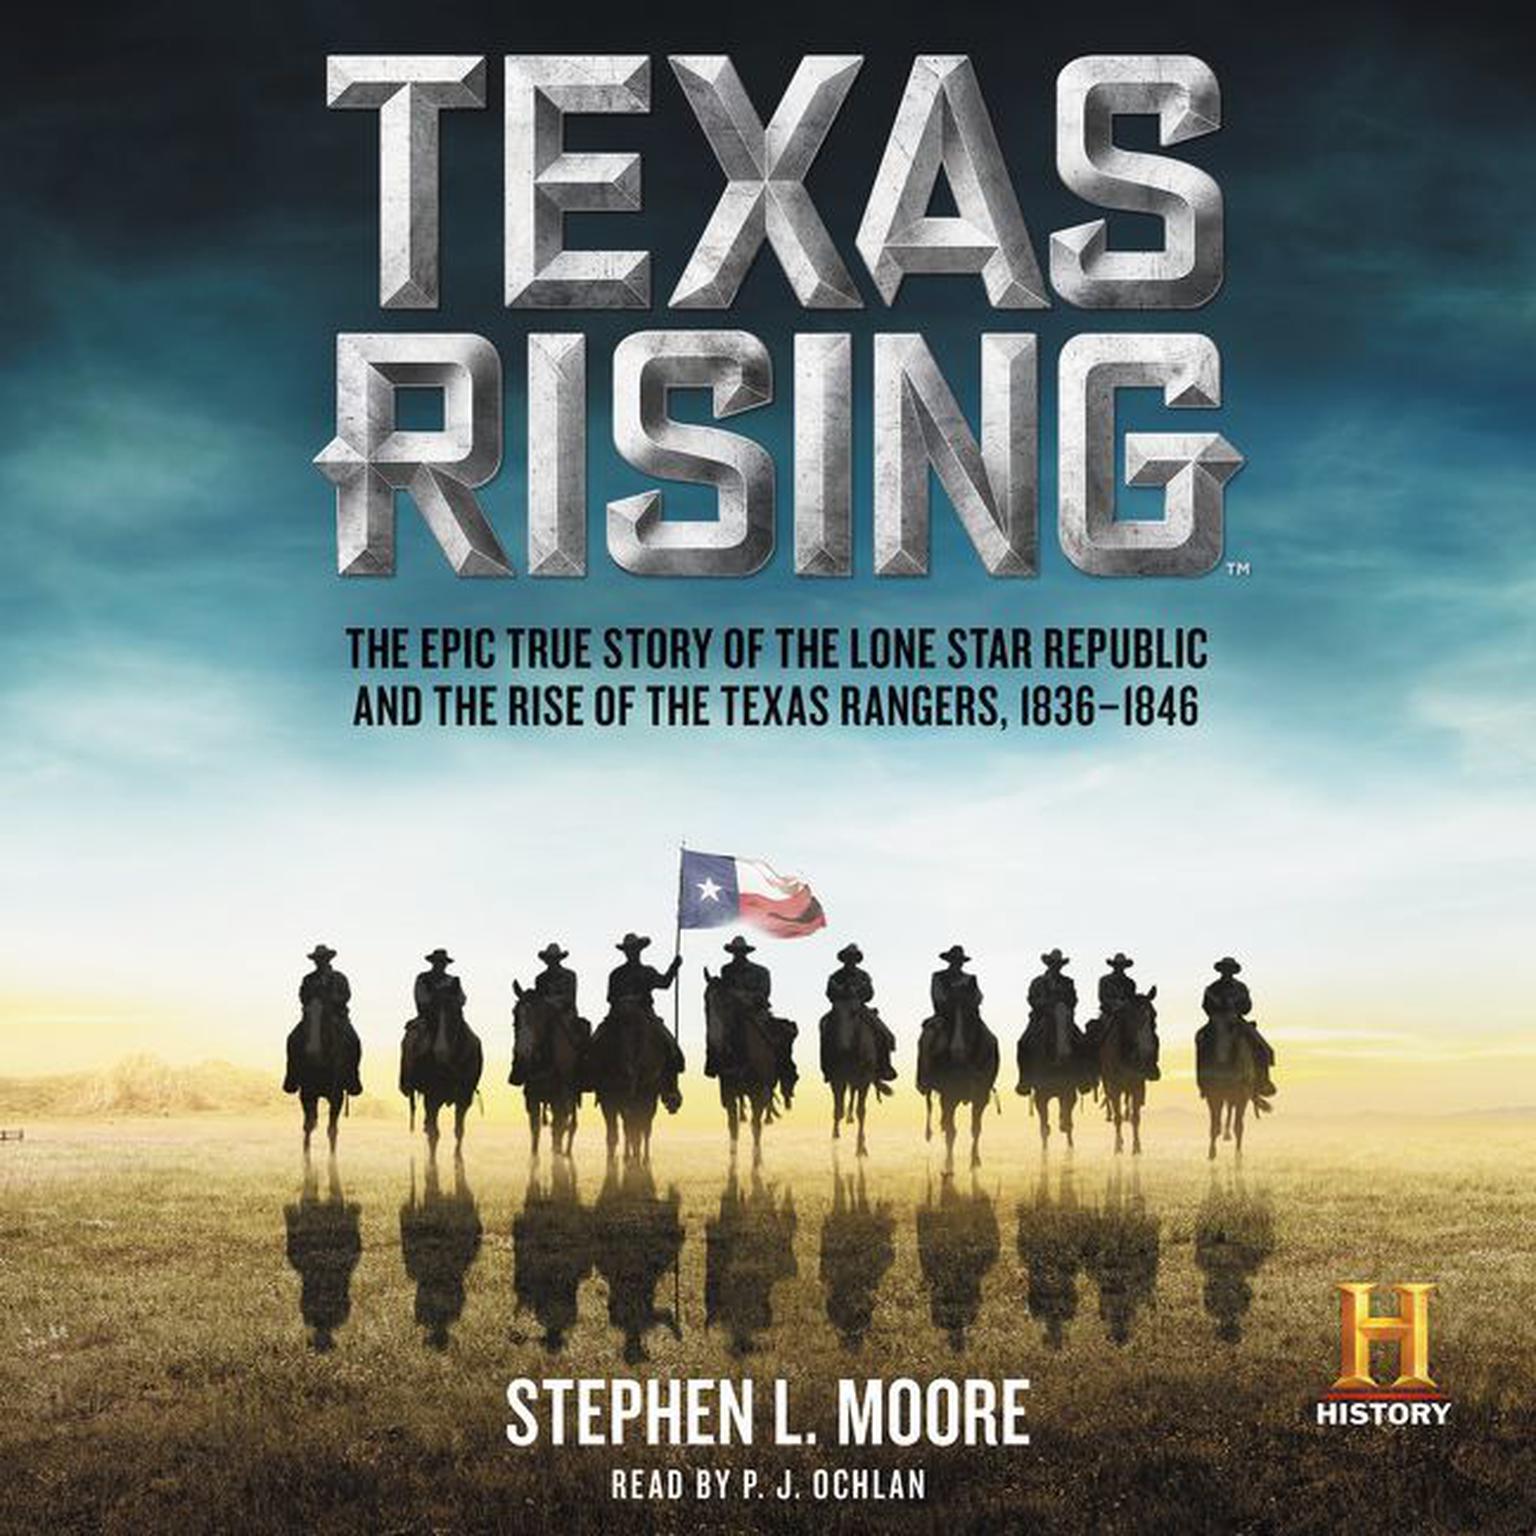 Texas Rising: The Epic True Story of the Lone Star Republic and the Rise of the Texas Rangers, 1836-1846 Audiobook, by Stephen L. Moore